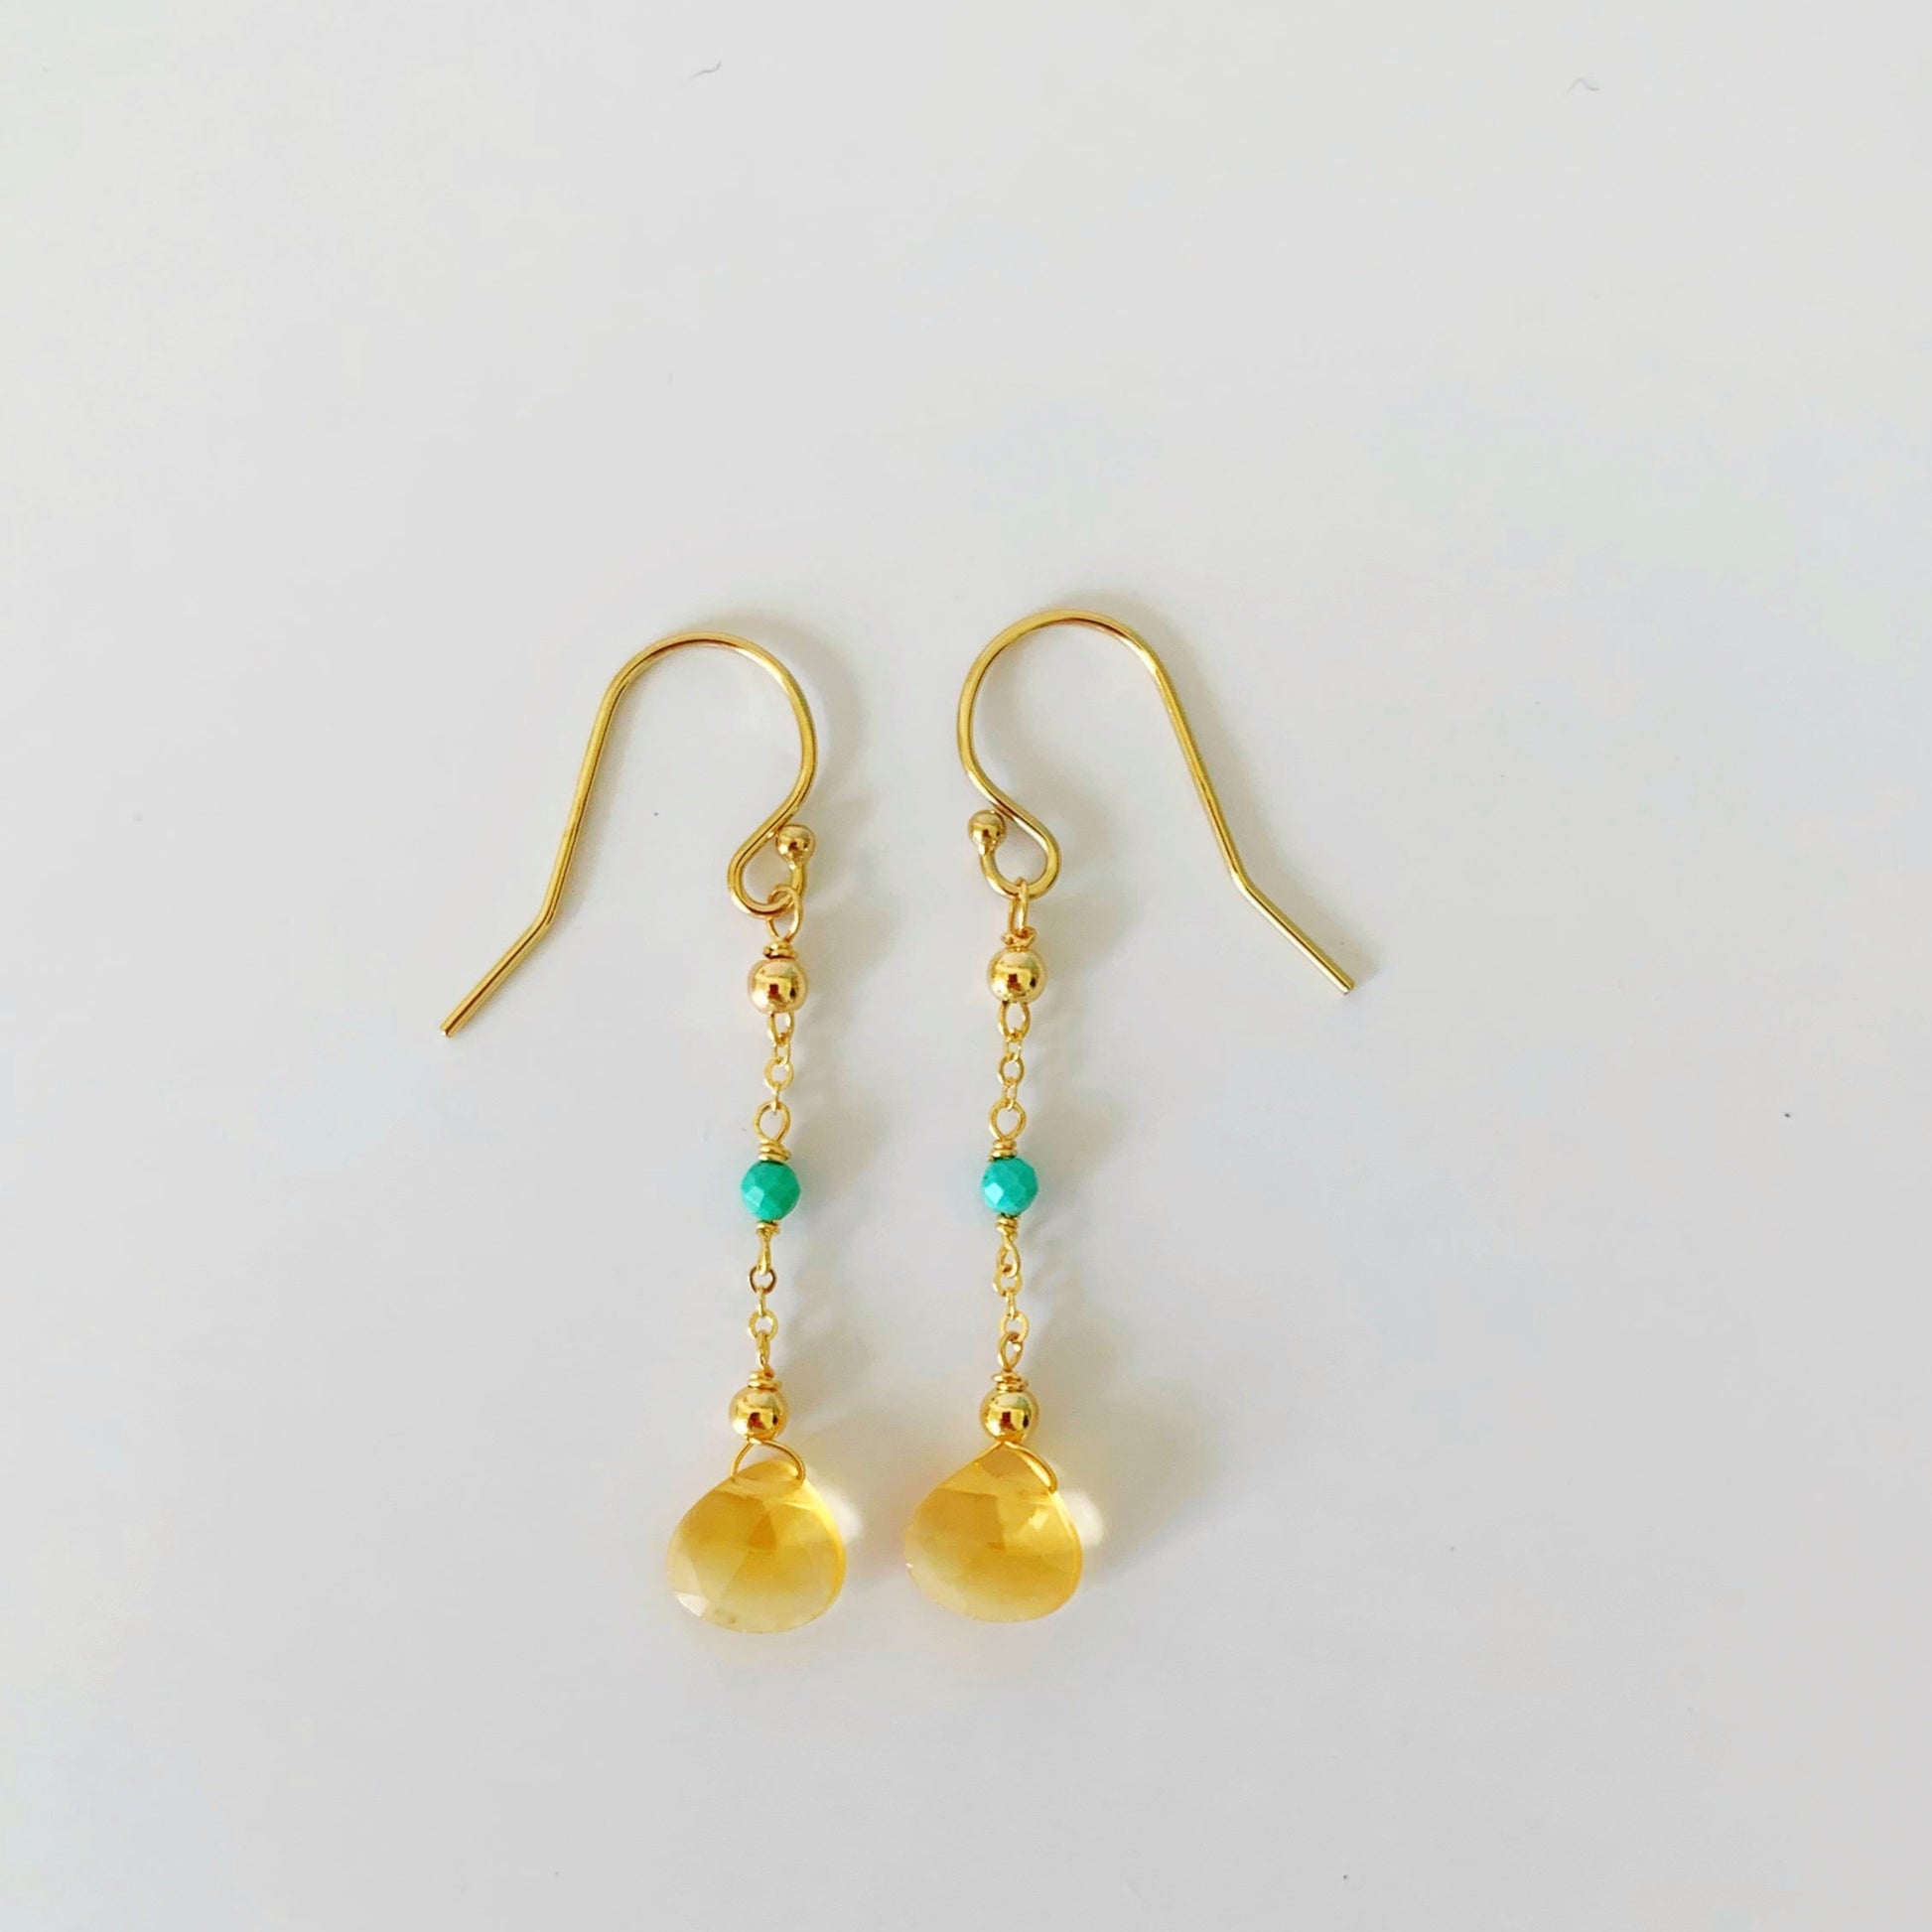 ray of sunshine earrings are designed by mermaids and madeleines they have yellow citrine drops suspended by 14k gold filled chain and findings with natural turquoise. this pair is pictured on a white background